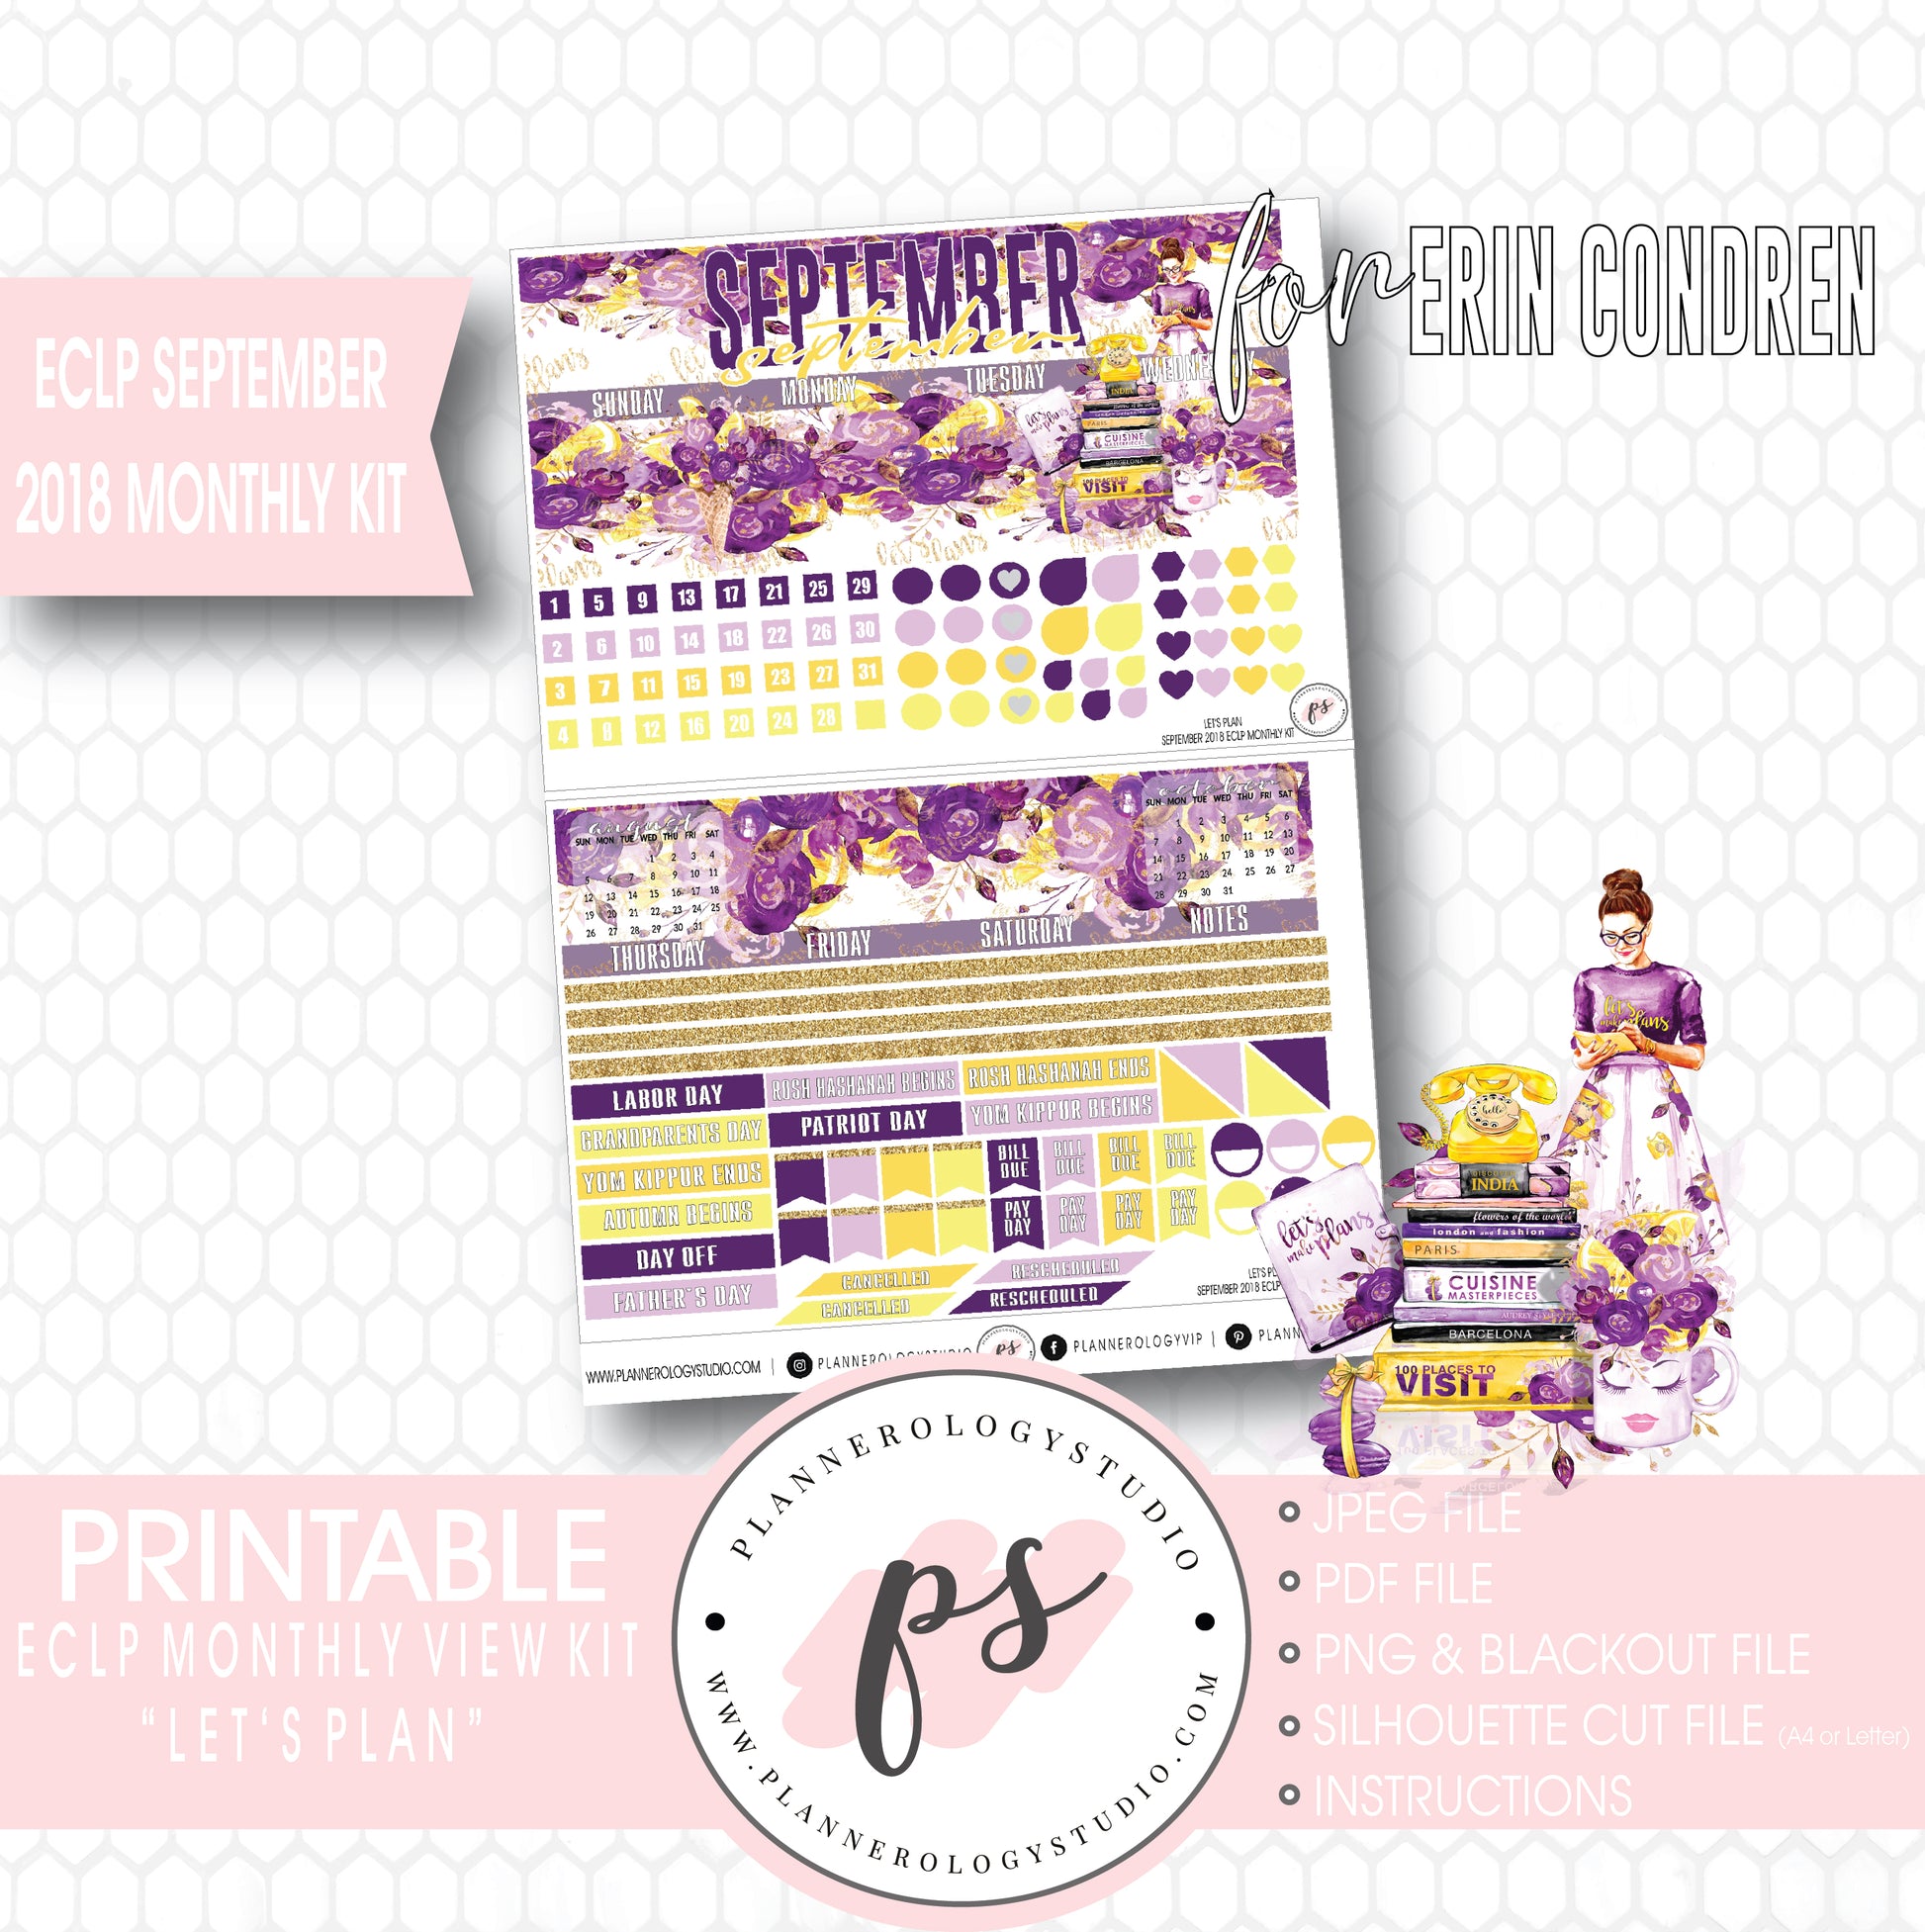 Let's Plan September 2018 Monthly View Kit Digital Printable Planner Stickers (for use with Erin Condren) - Plannerologystudio